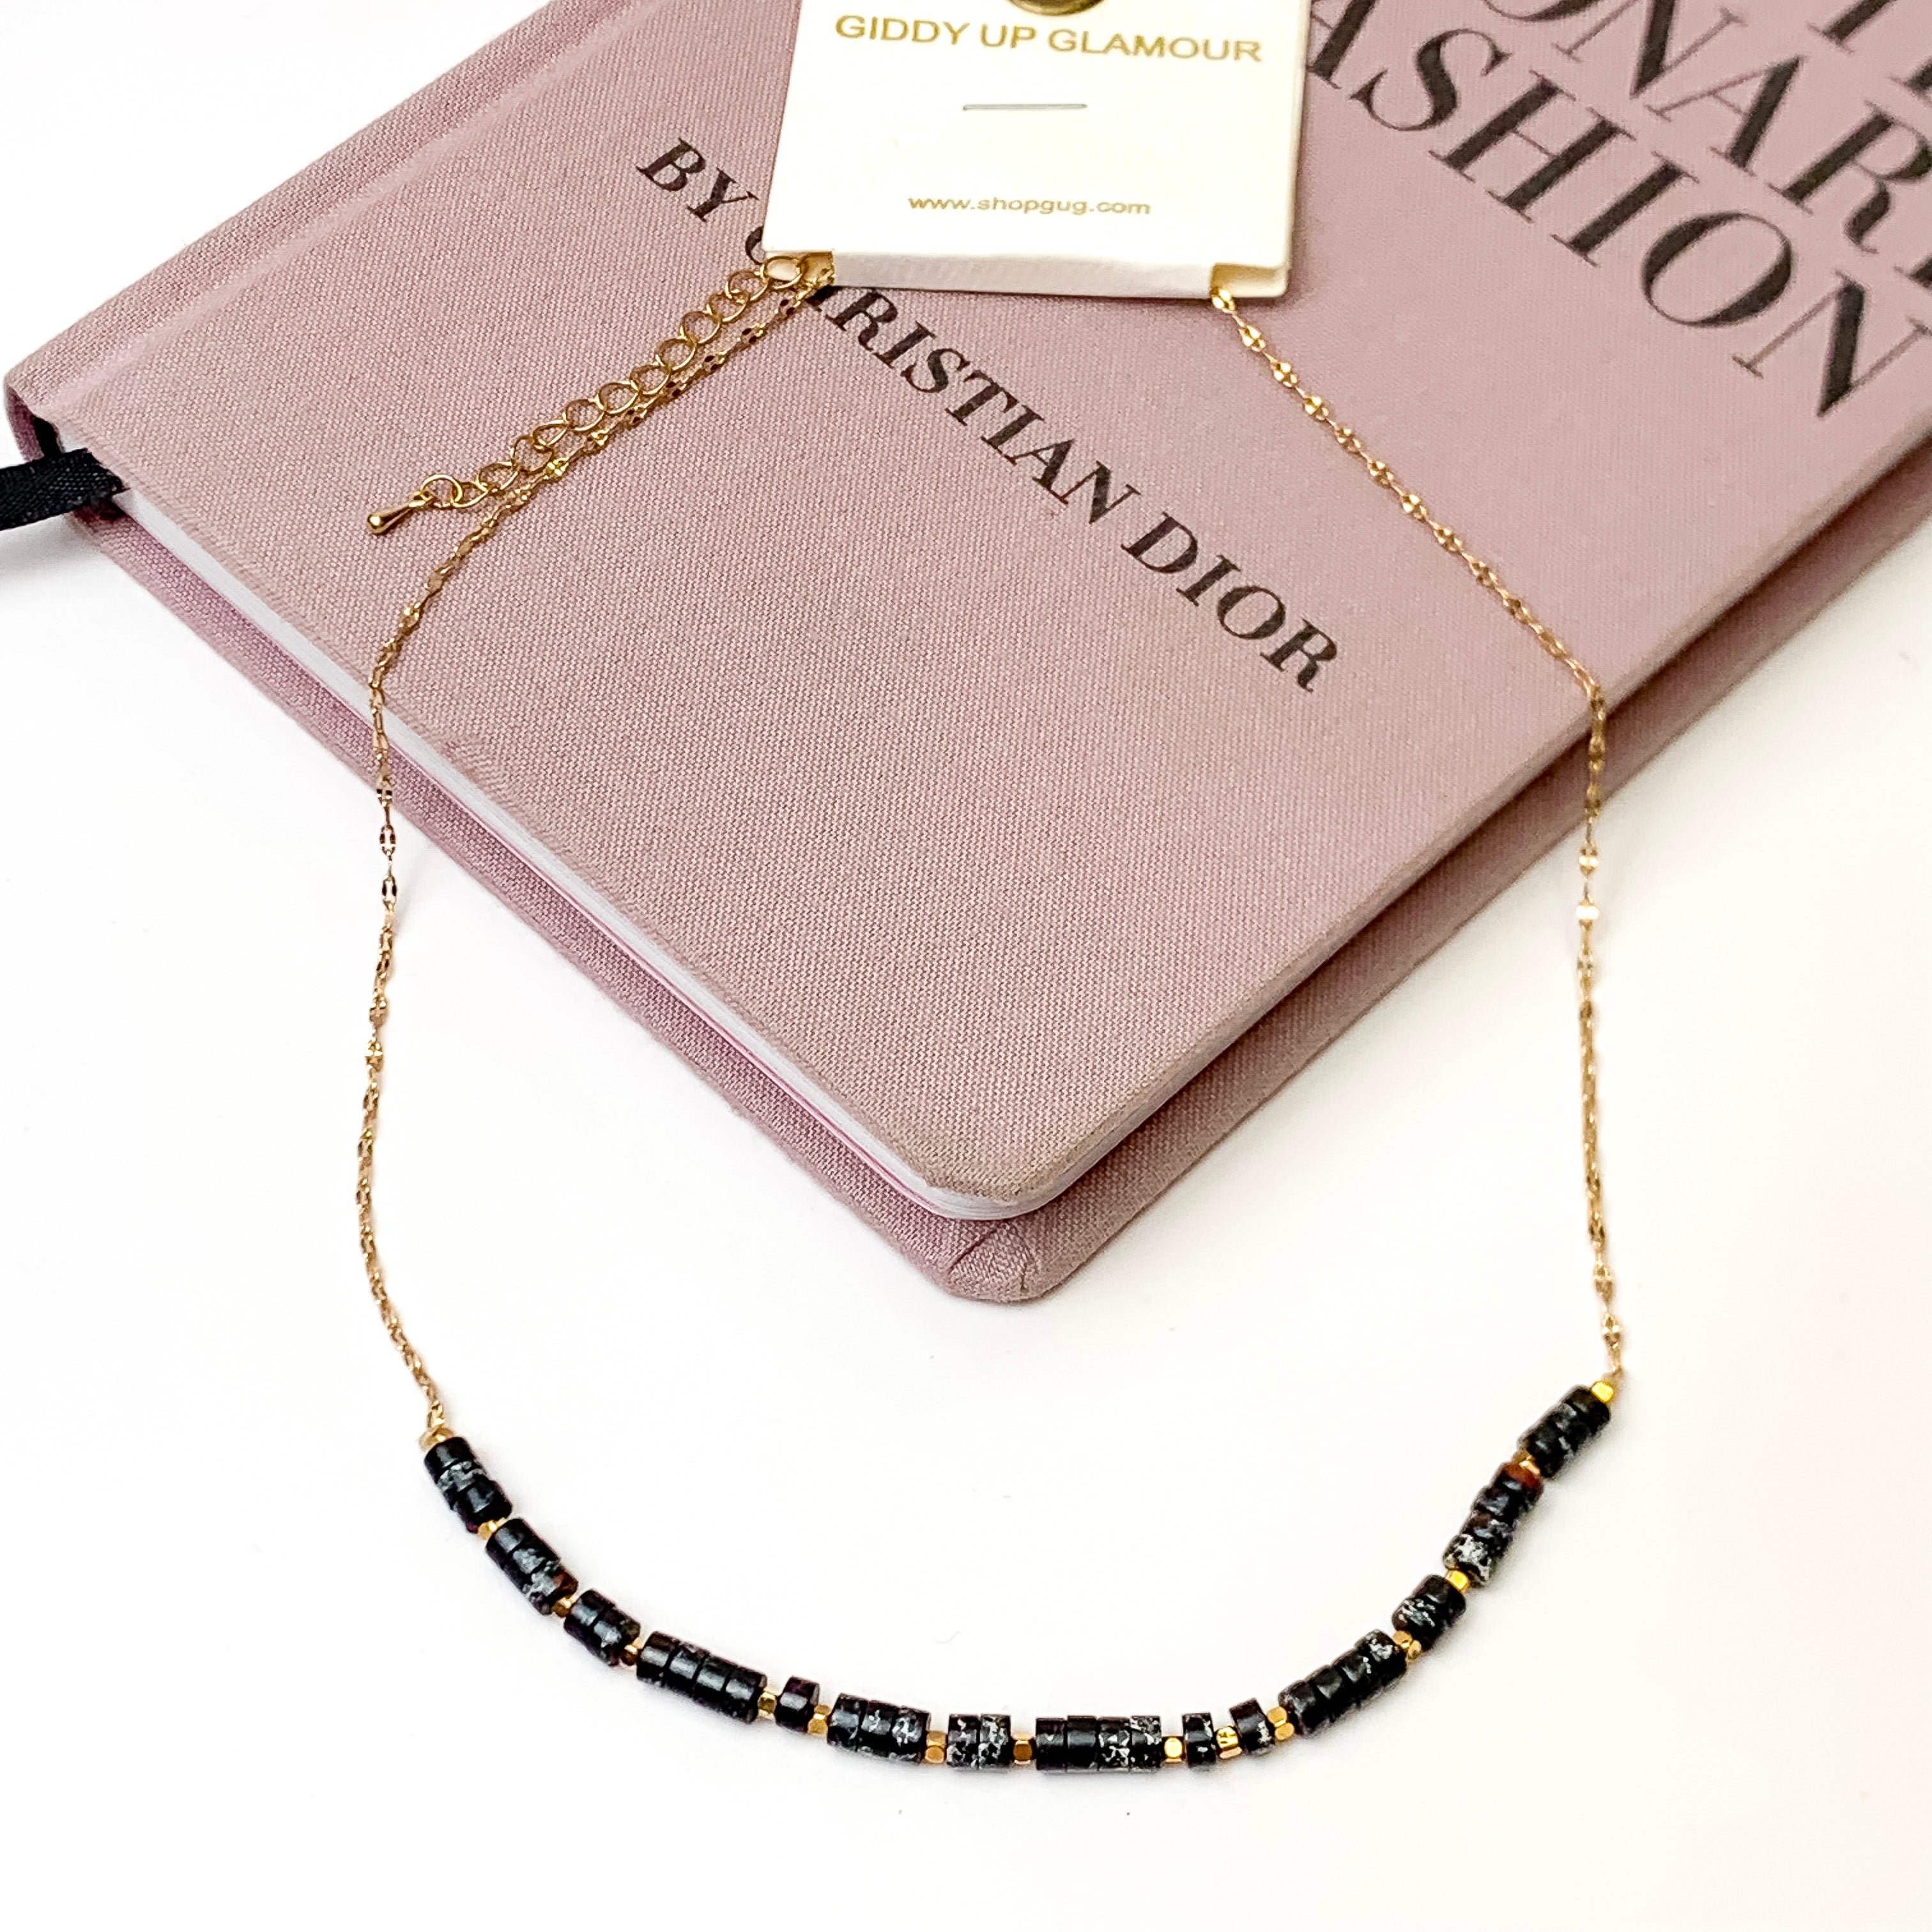 Gold Chain Necklace with Pipestone Inspired Segment in Black - Giddy Up Glamour Boutique